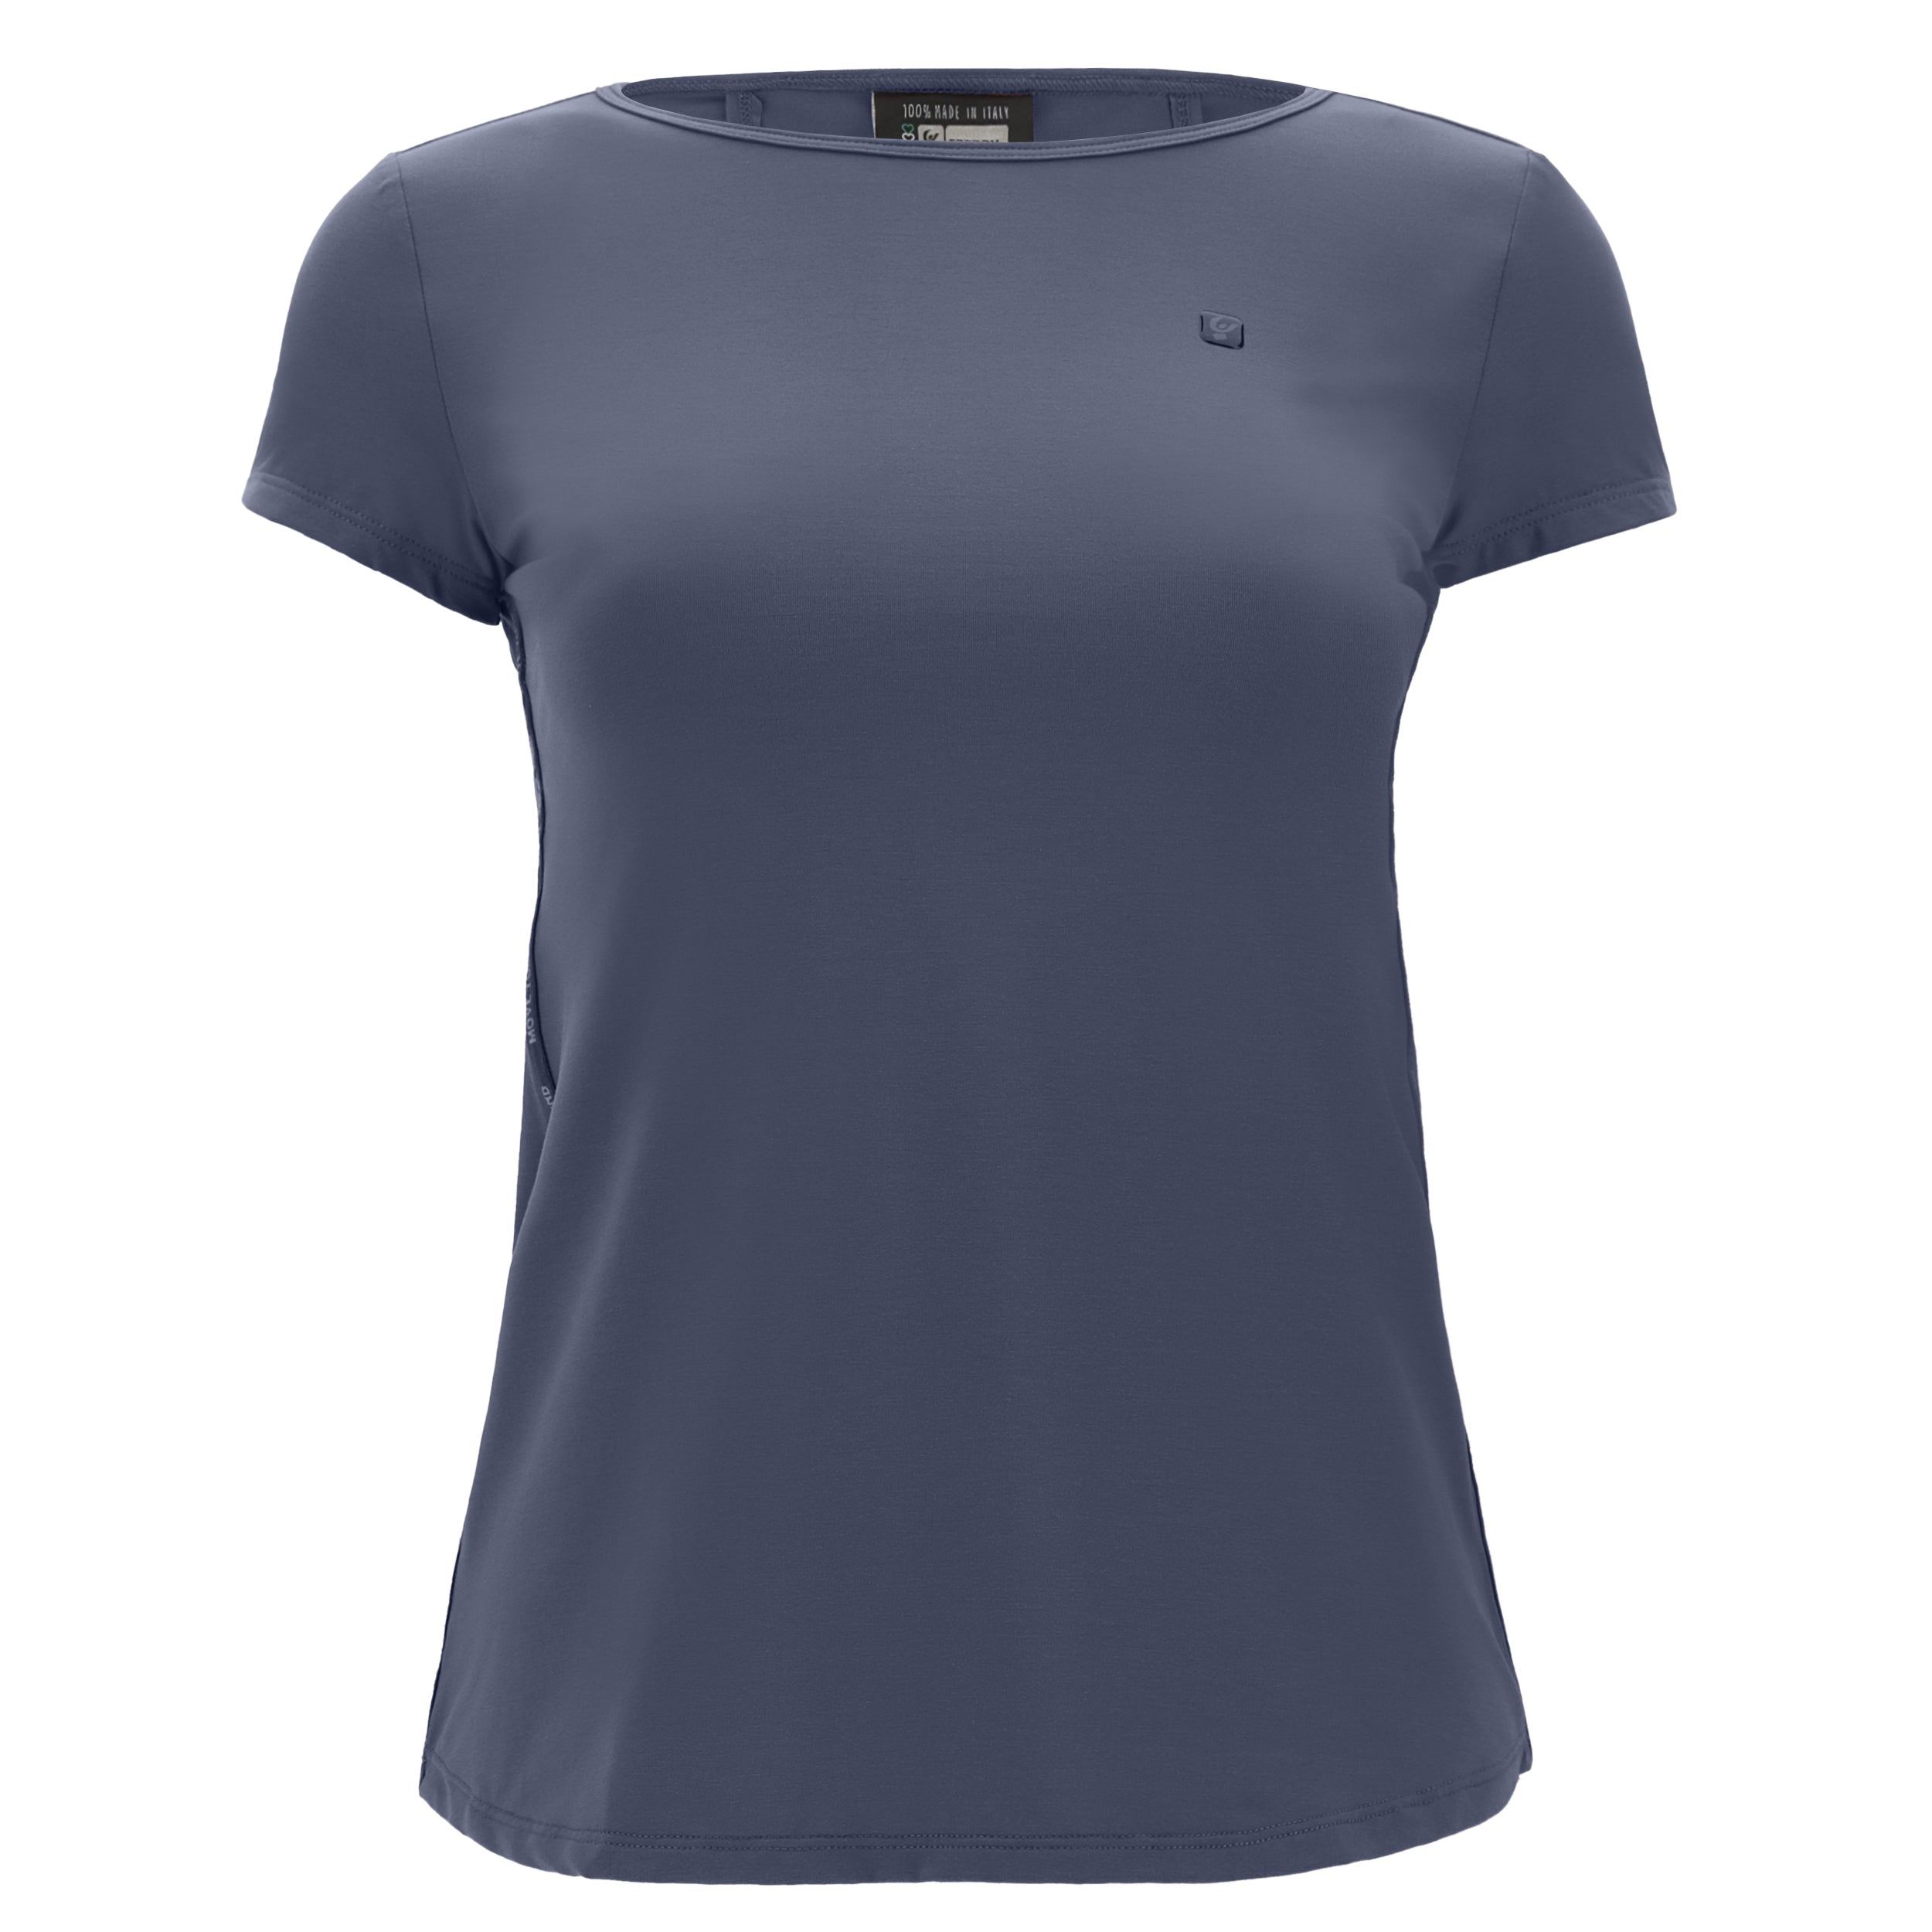 Yoga T-Shirt with openings at the back - Dusty Blue 2